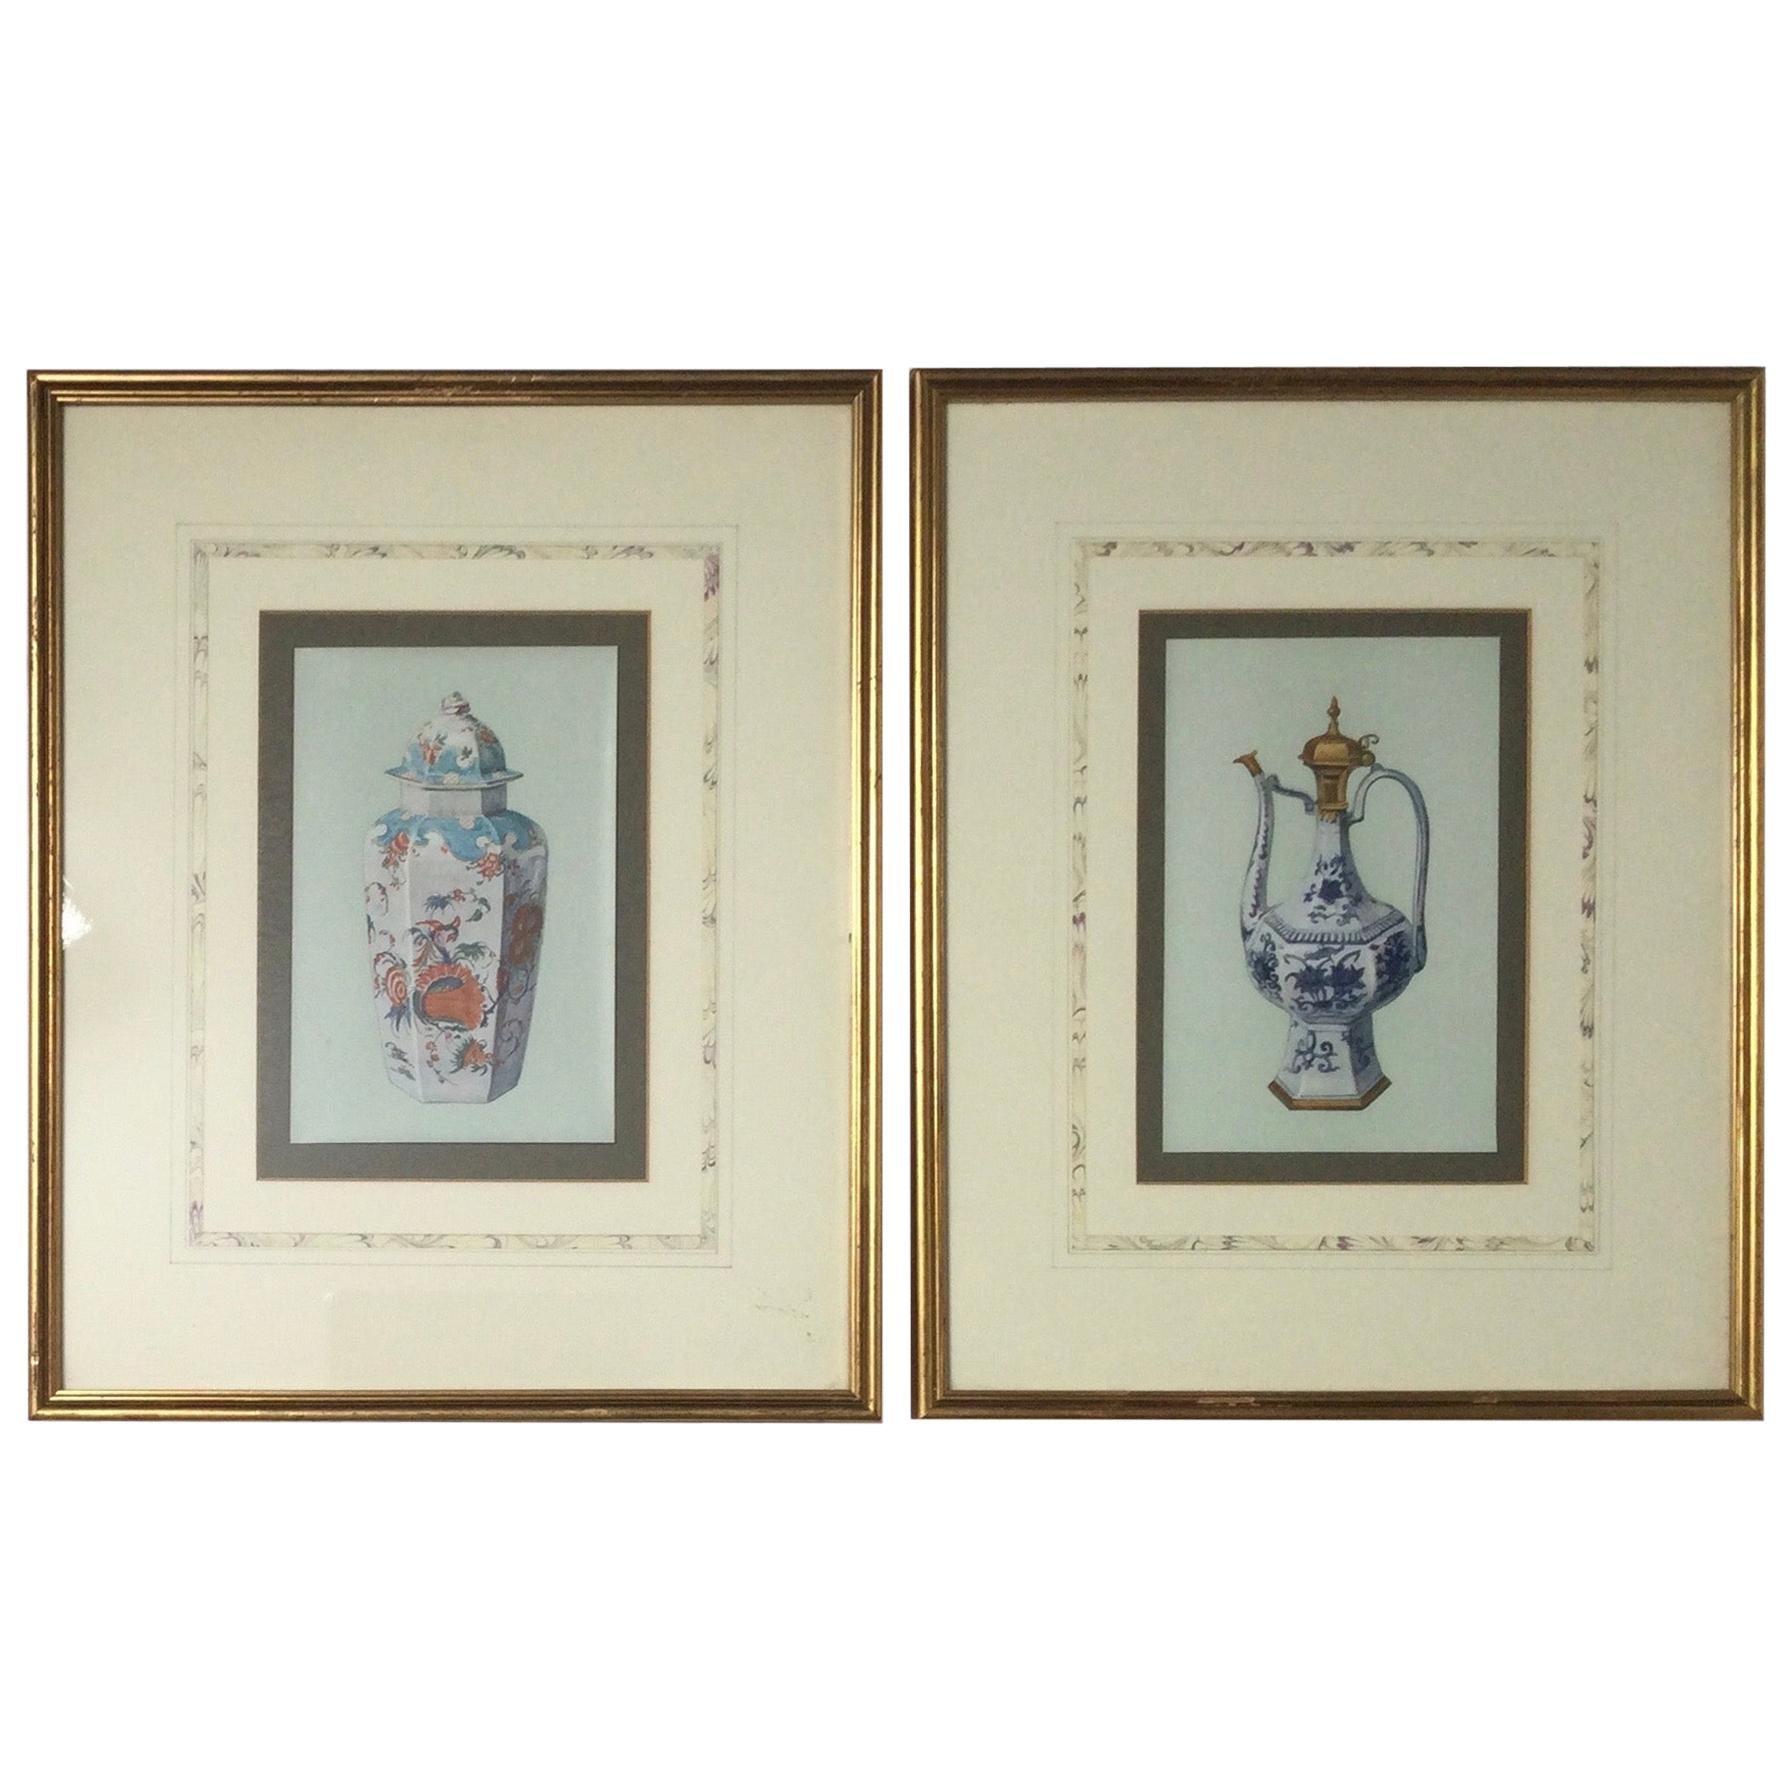 Pair of Early 20th Century Framed Prints